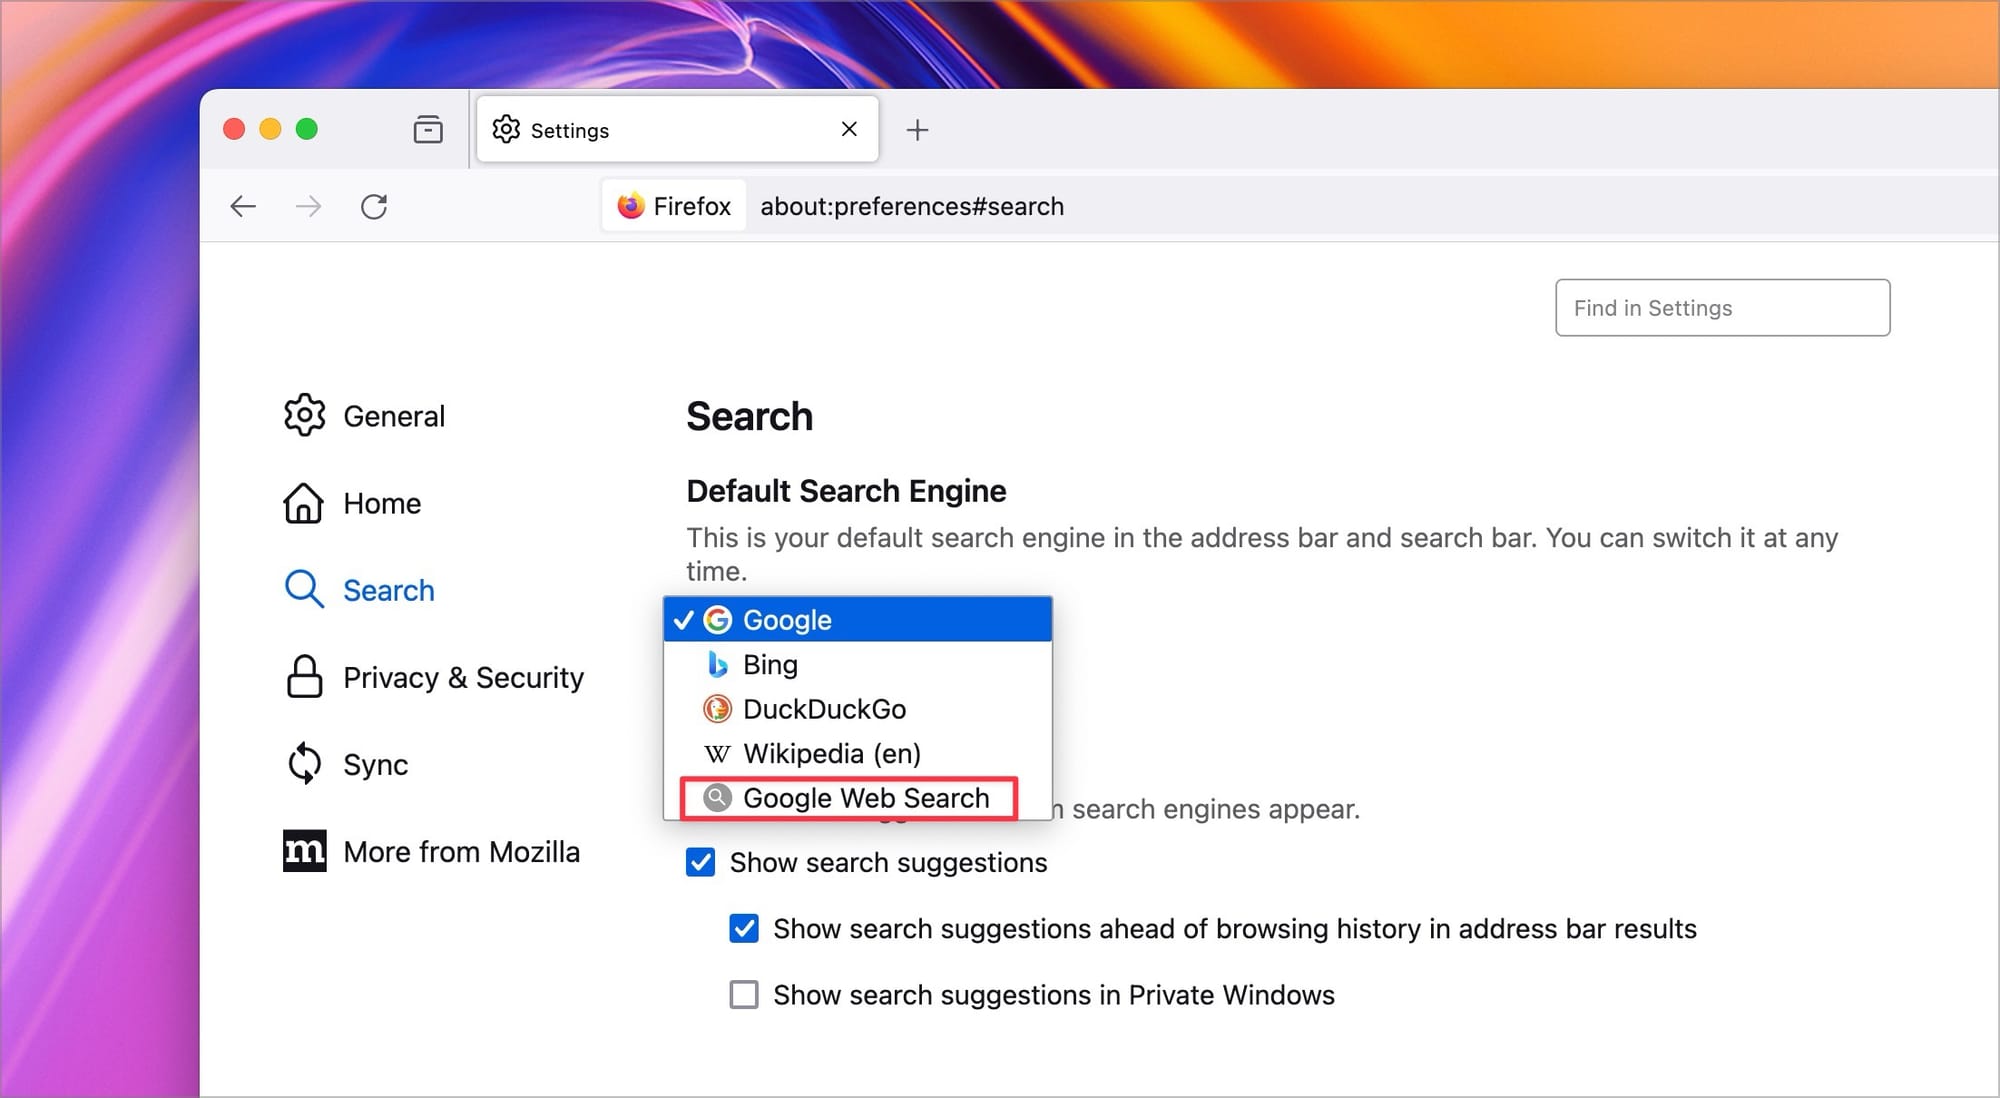 set it as the default using the Default Search Engine setting